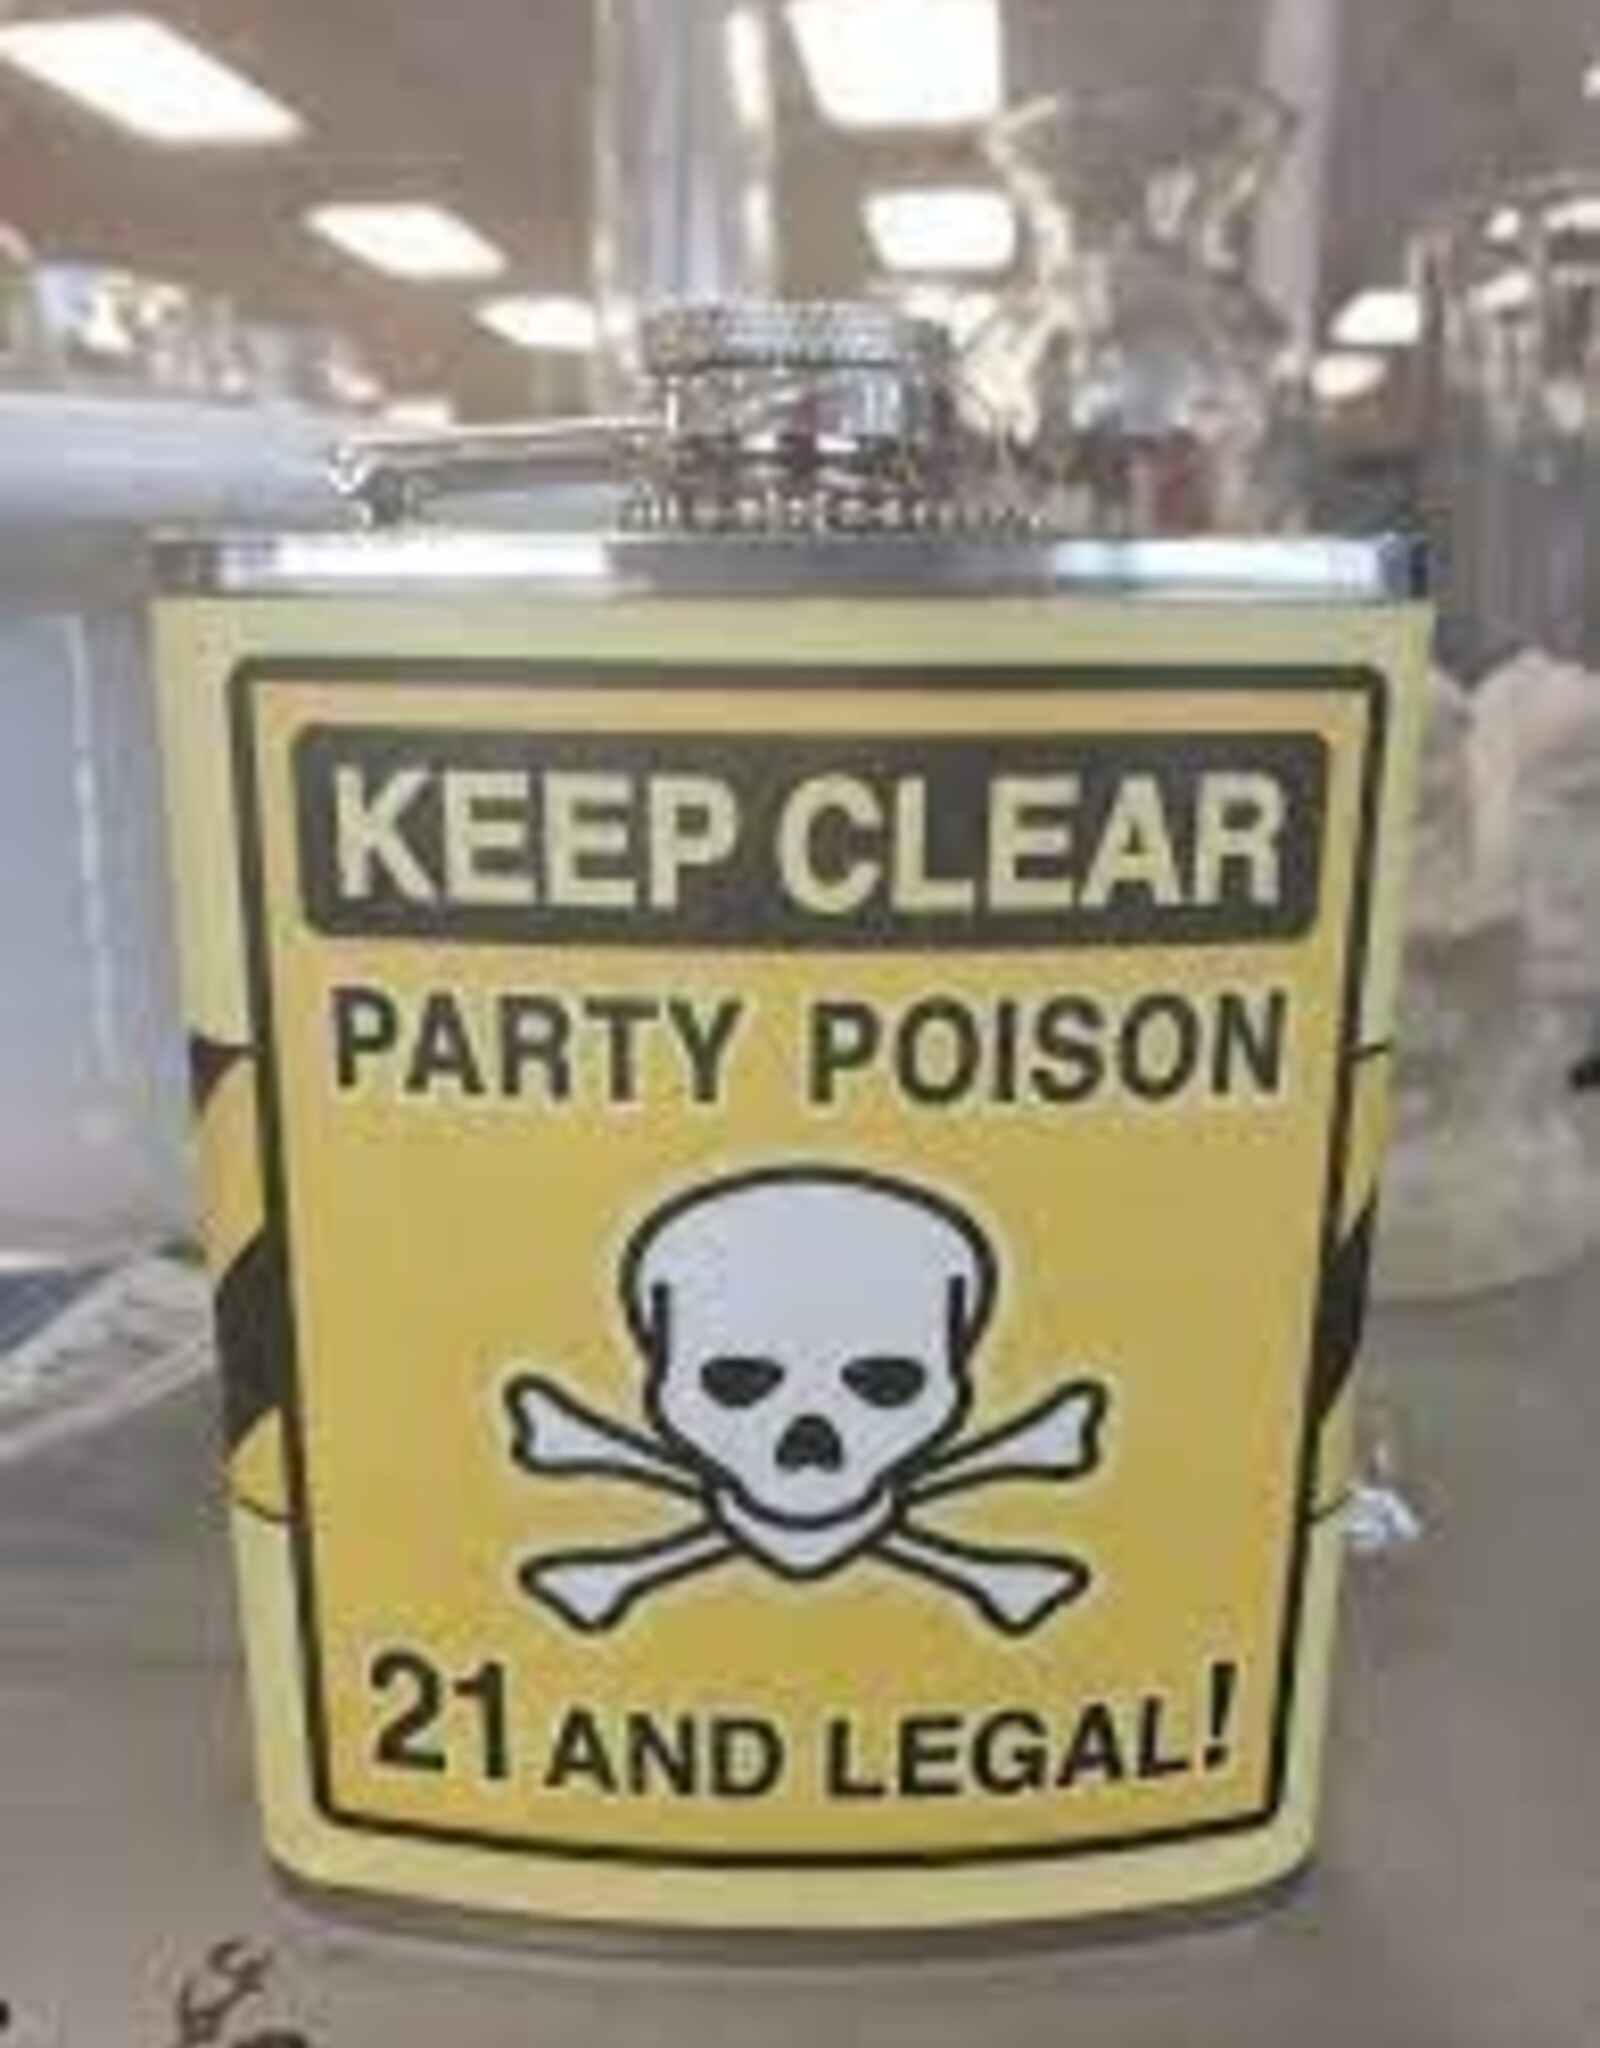 Keep Clear Poison Flask